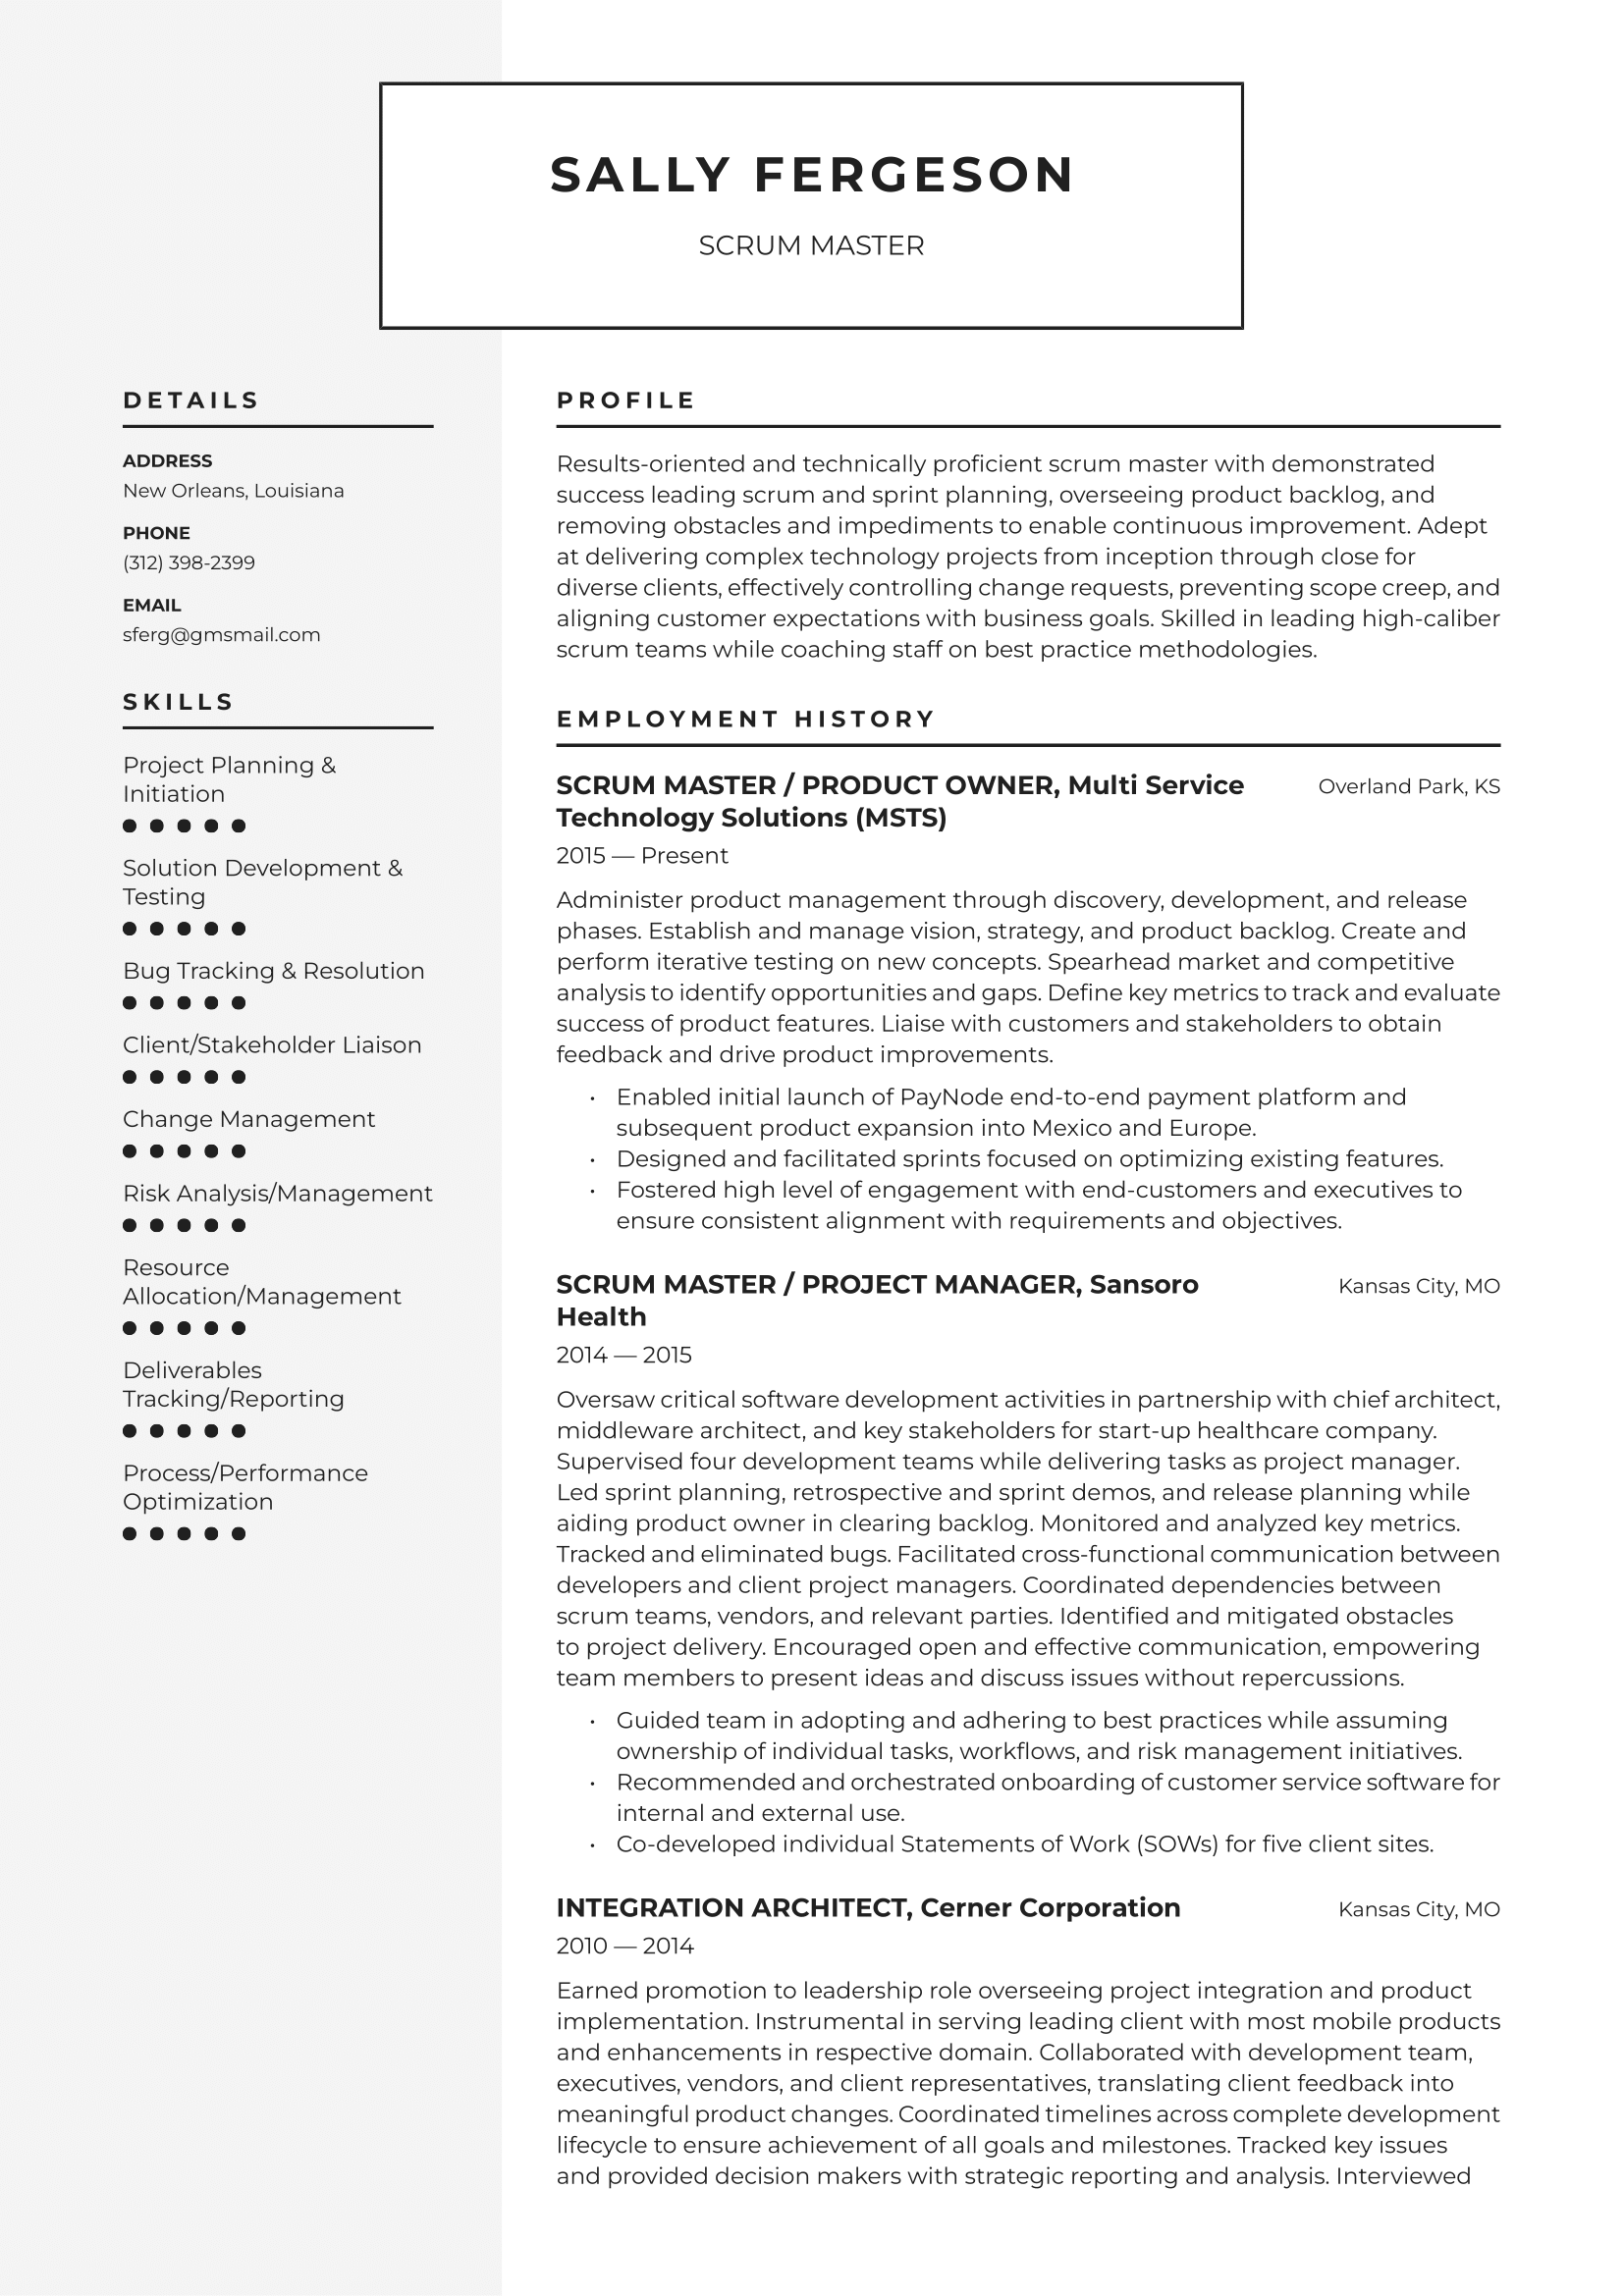 Scrum Master Resume Example & Writing Guide